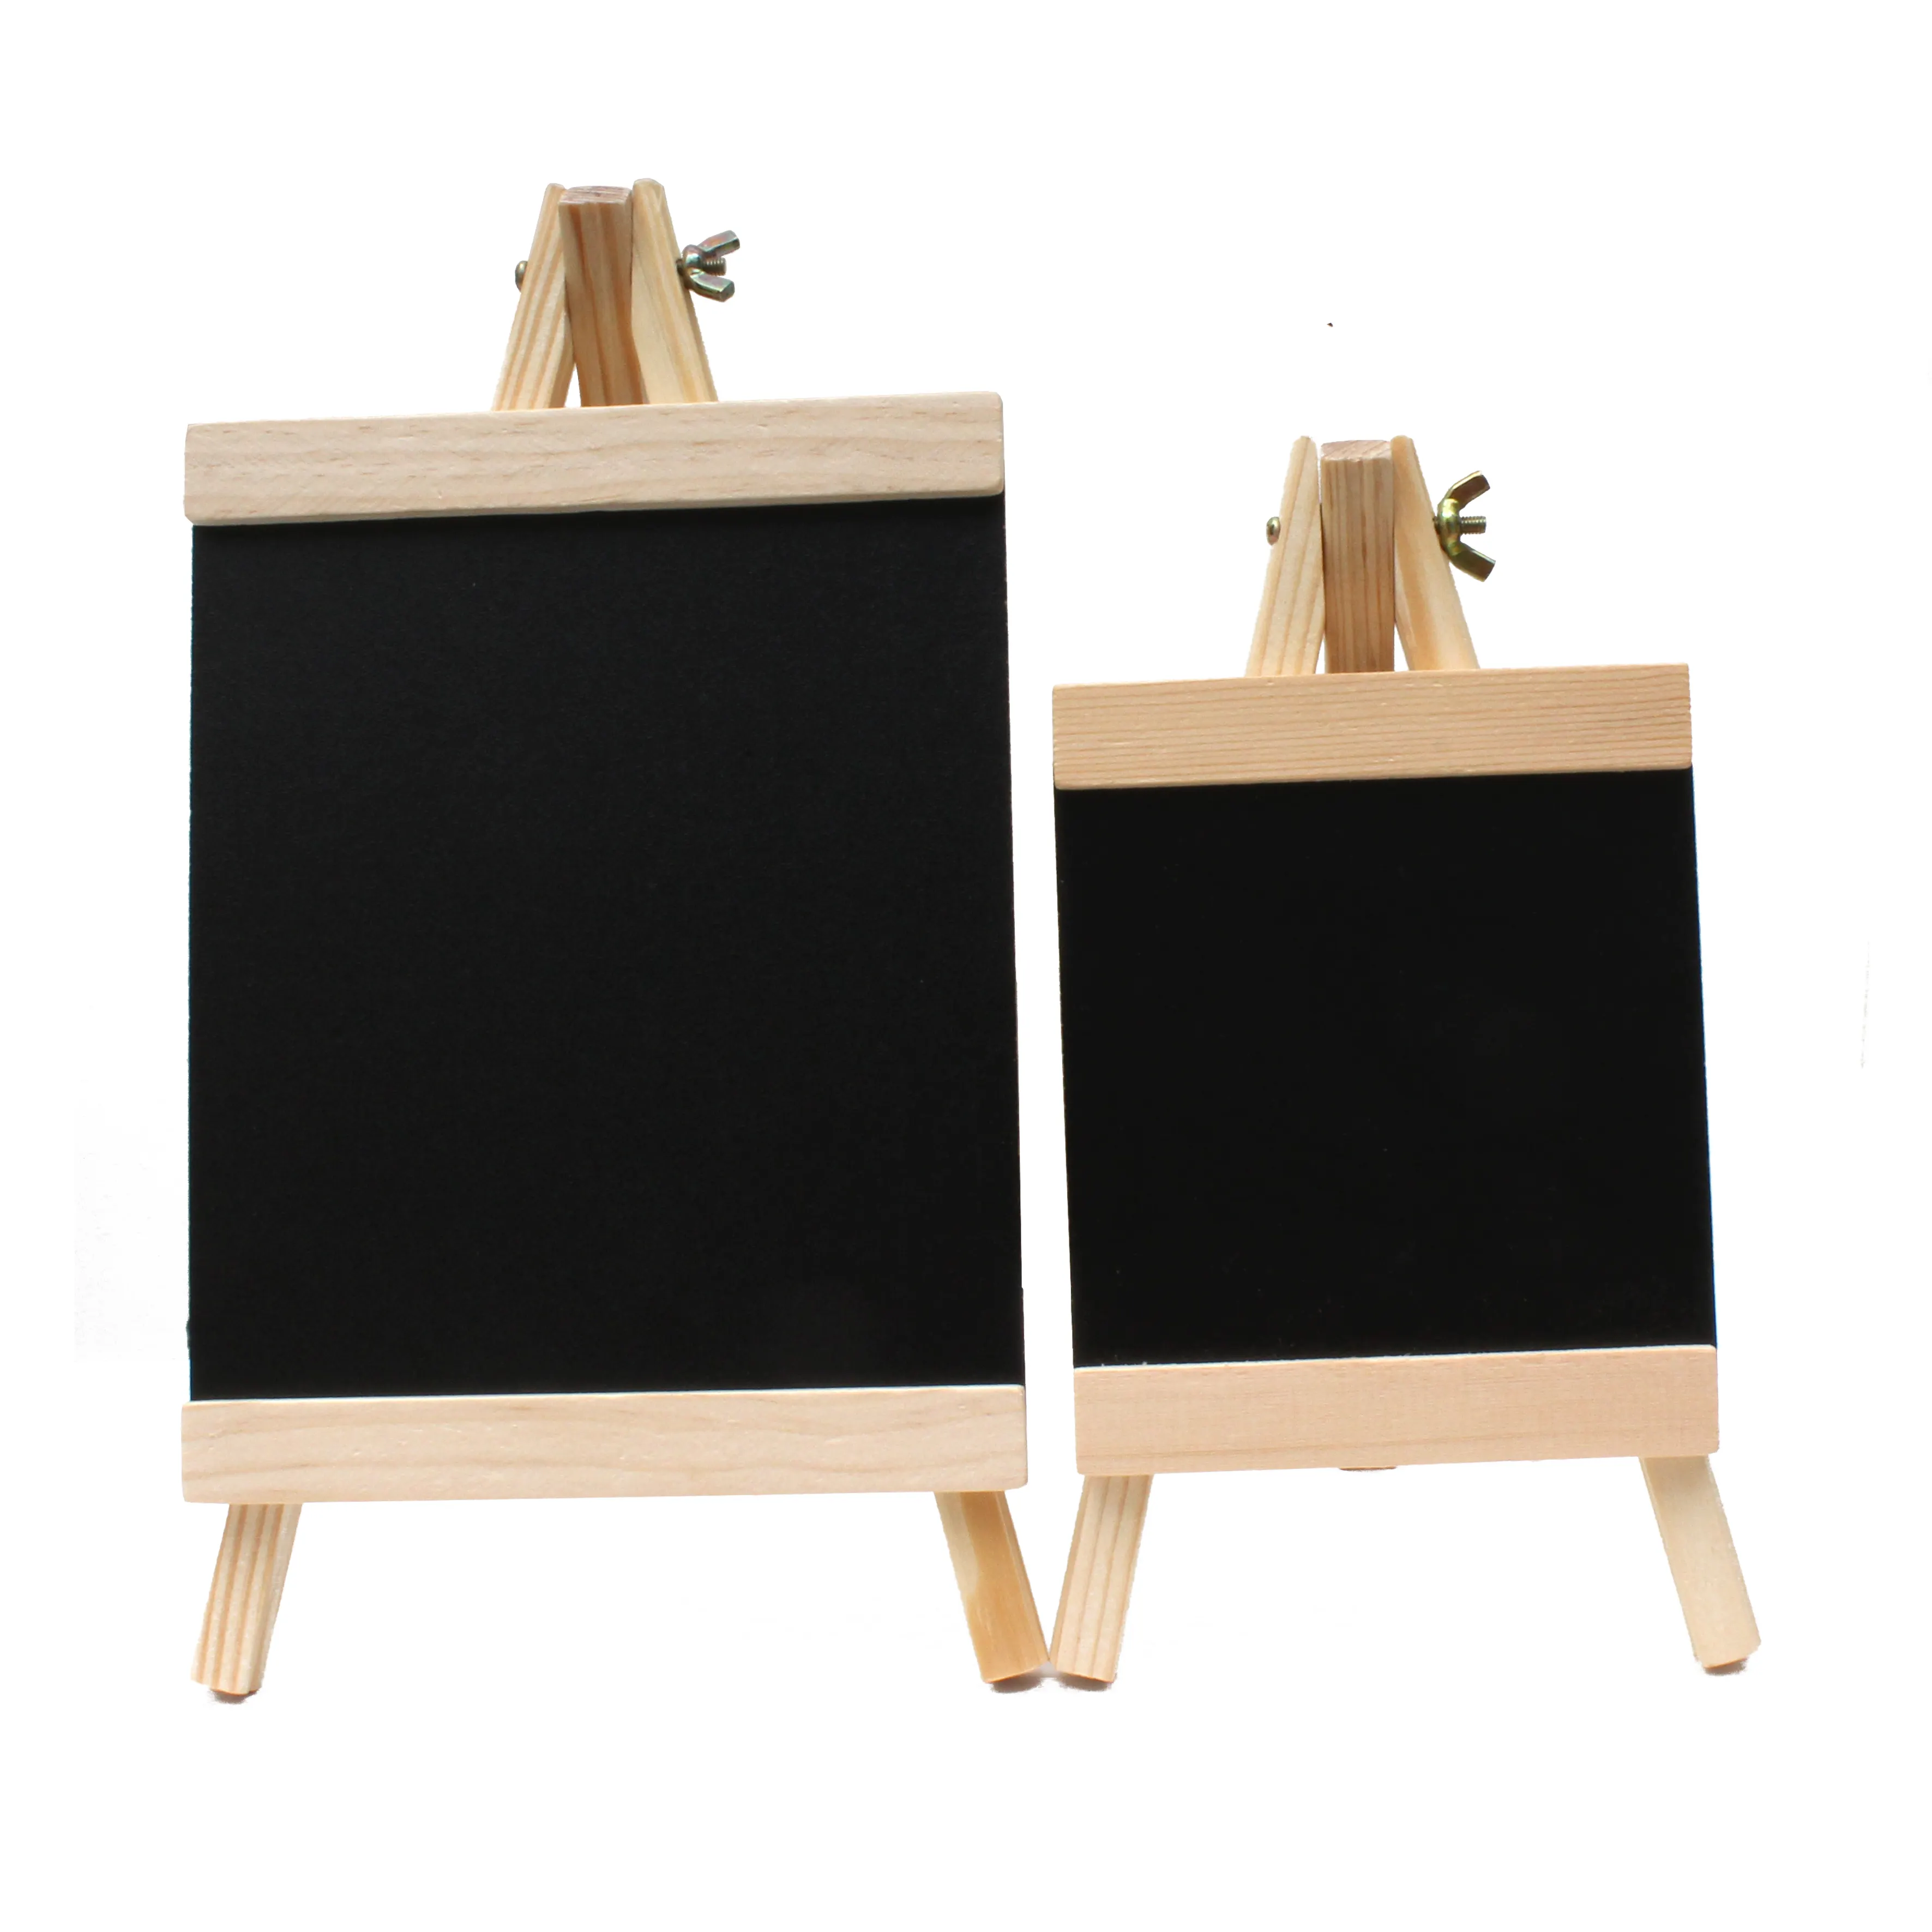 Mini Small Wooden Chalk Blackboard Wedding With Easel Stand Chalkboard Writing Notice Message Paint Wood Board